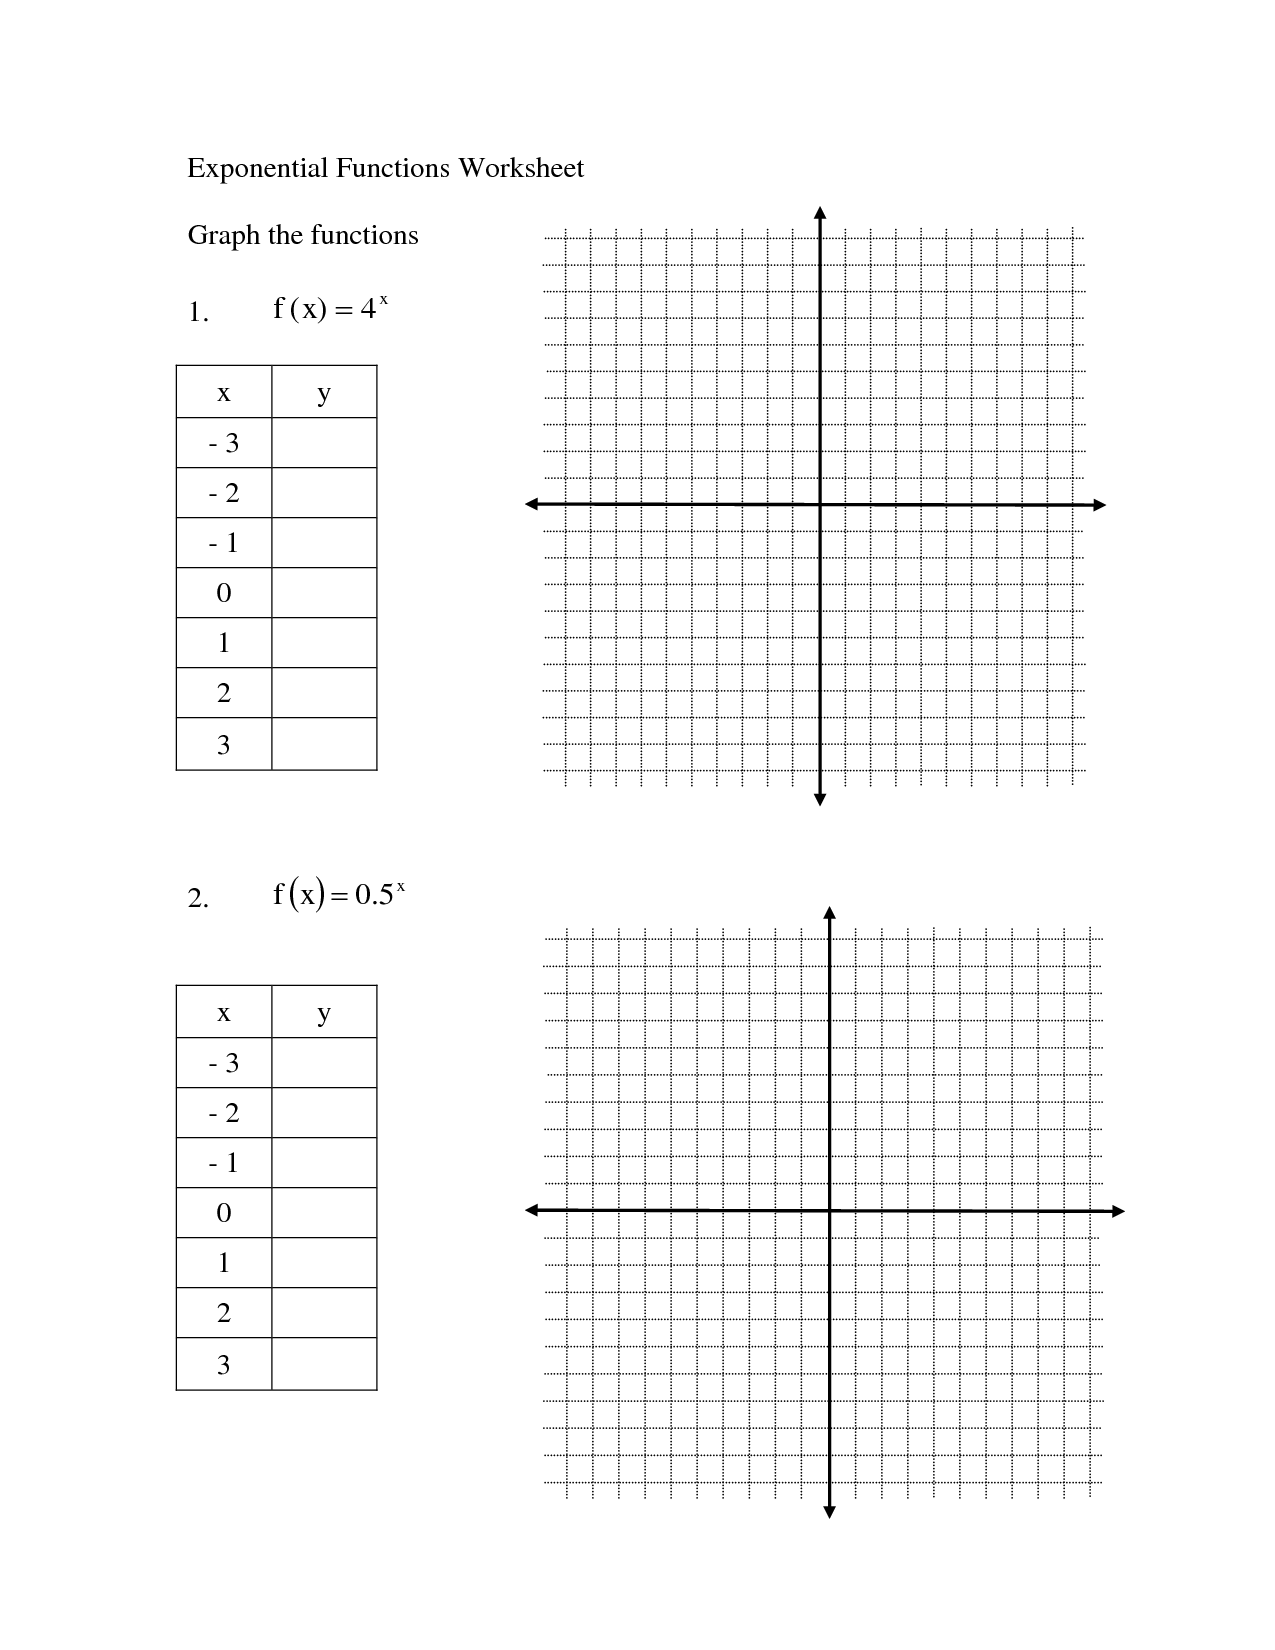 unit 6 homework 7 graphing exponential functions